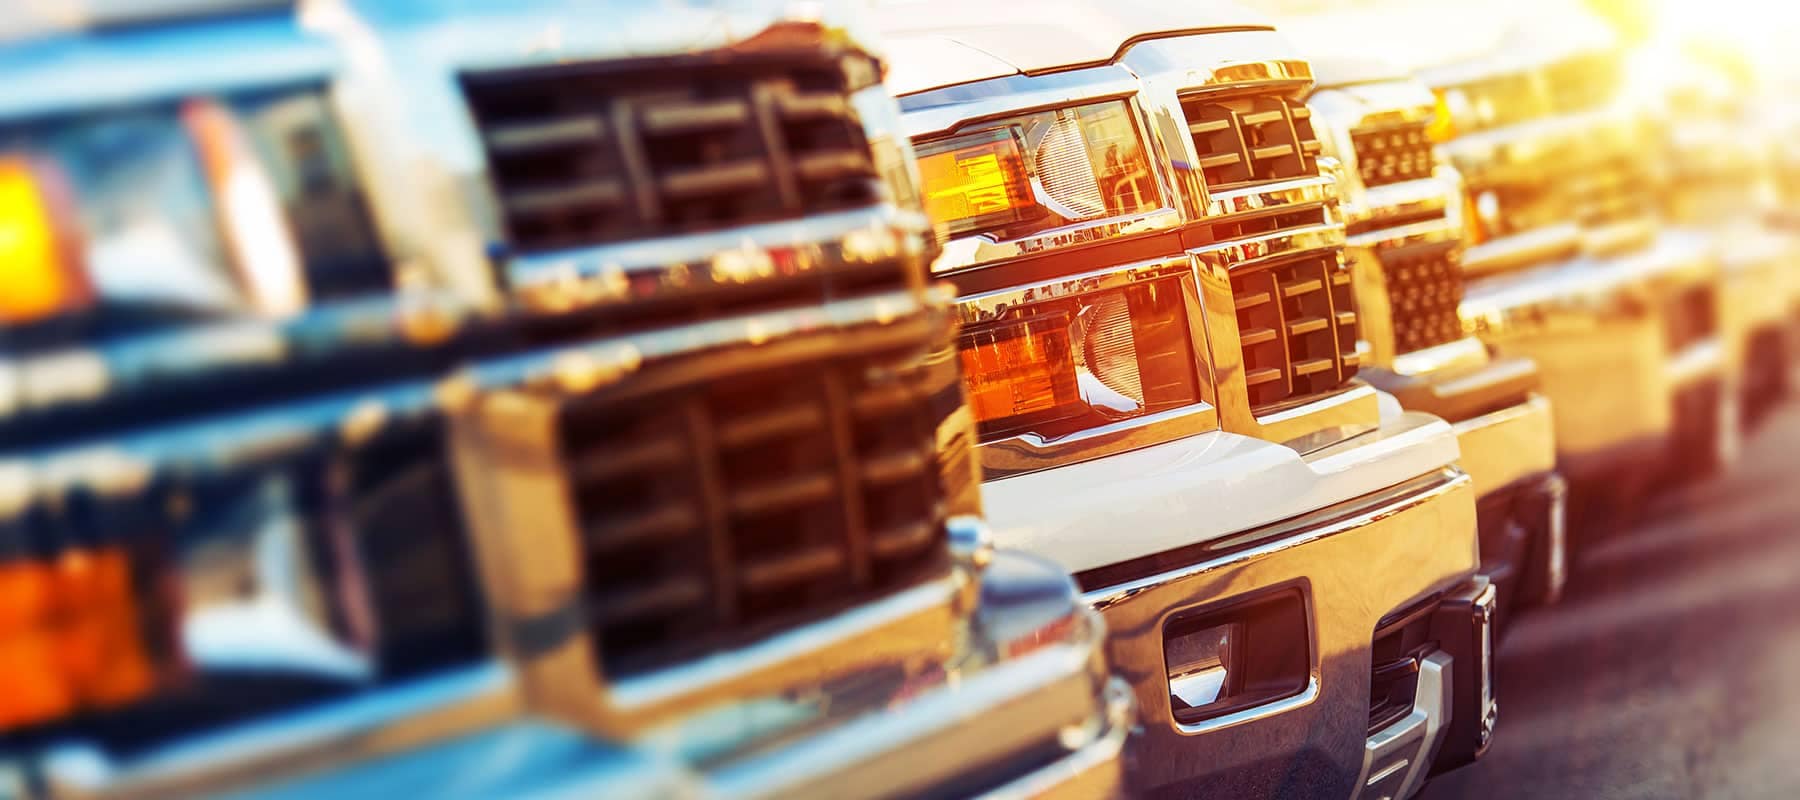 truck grills all lined in a row